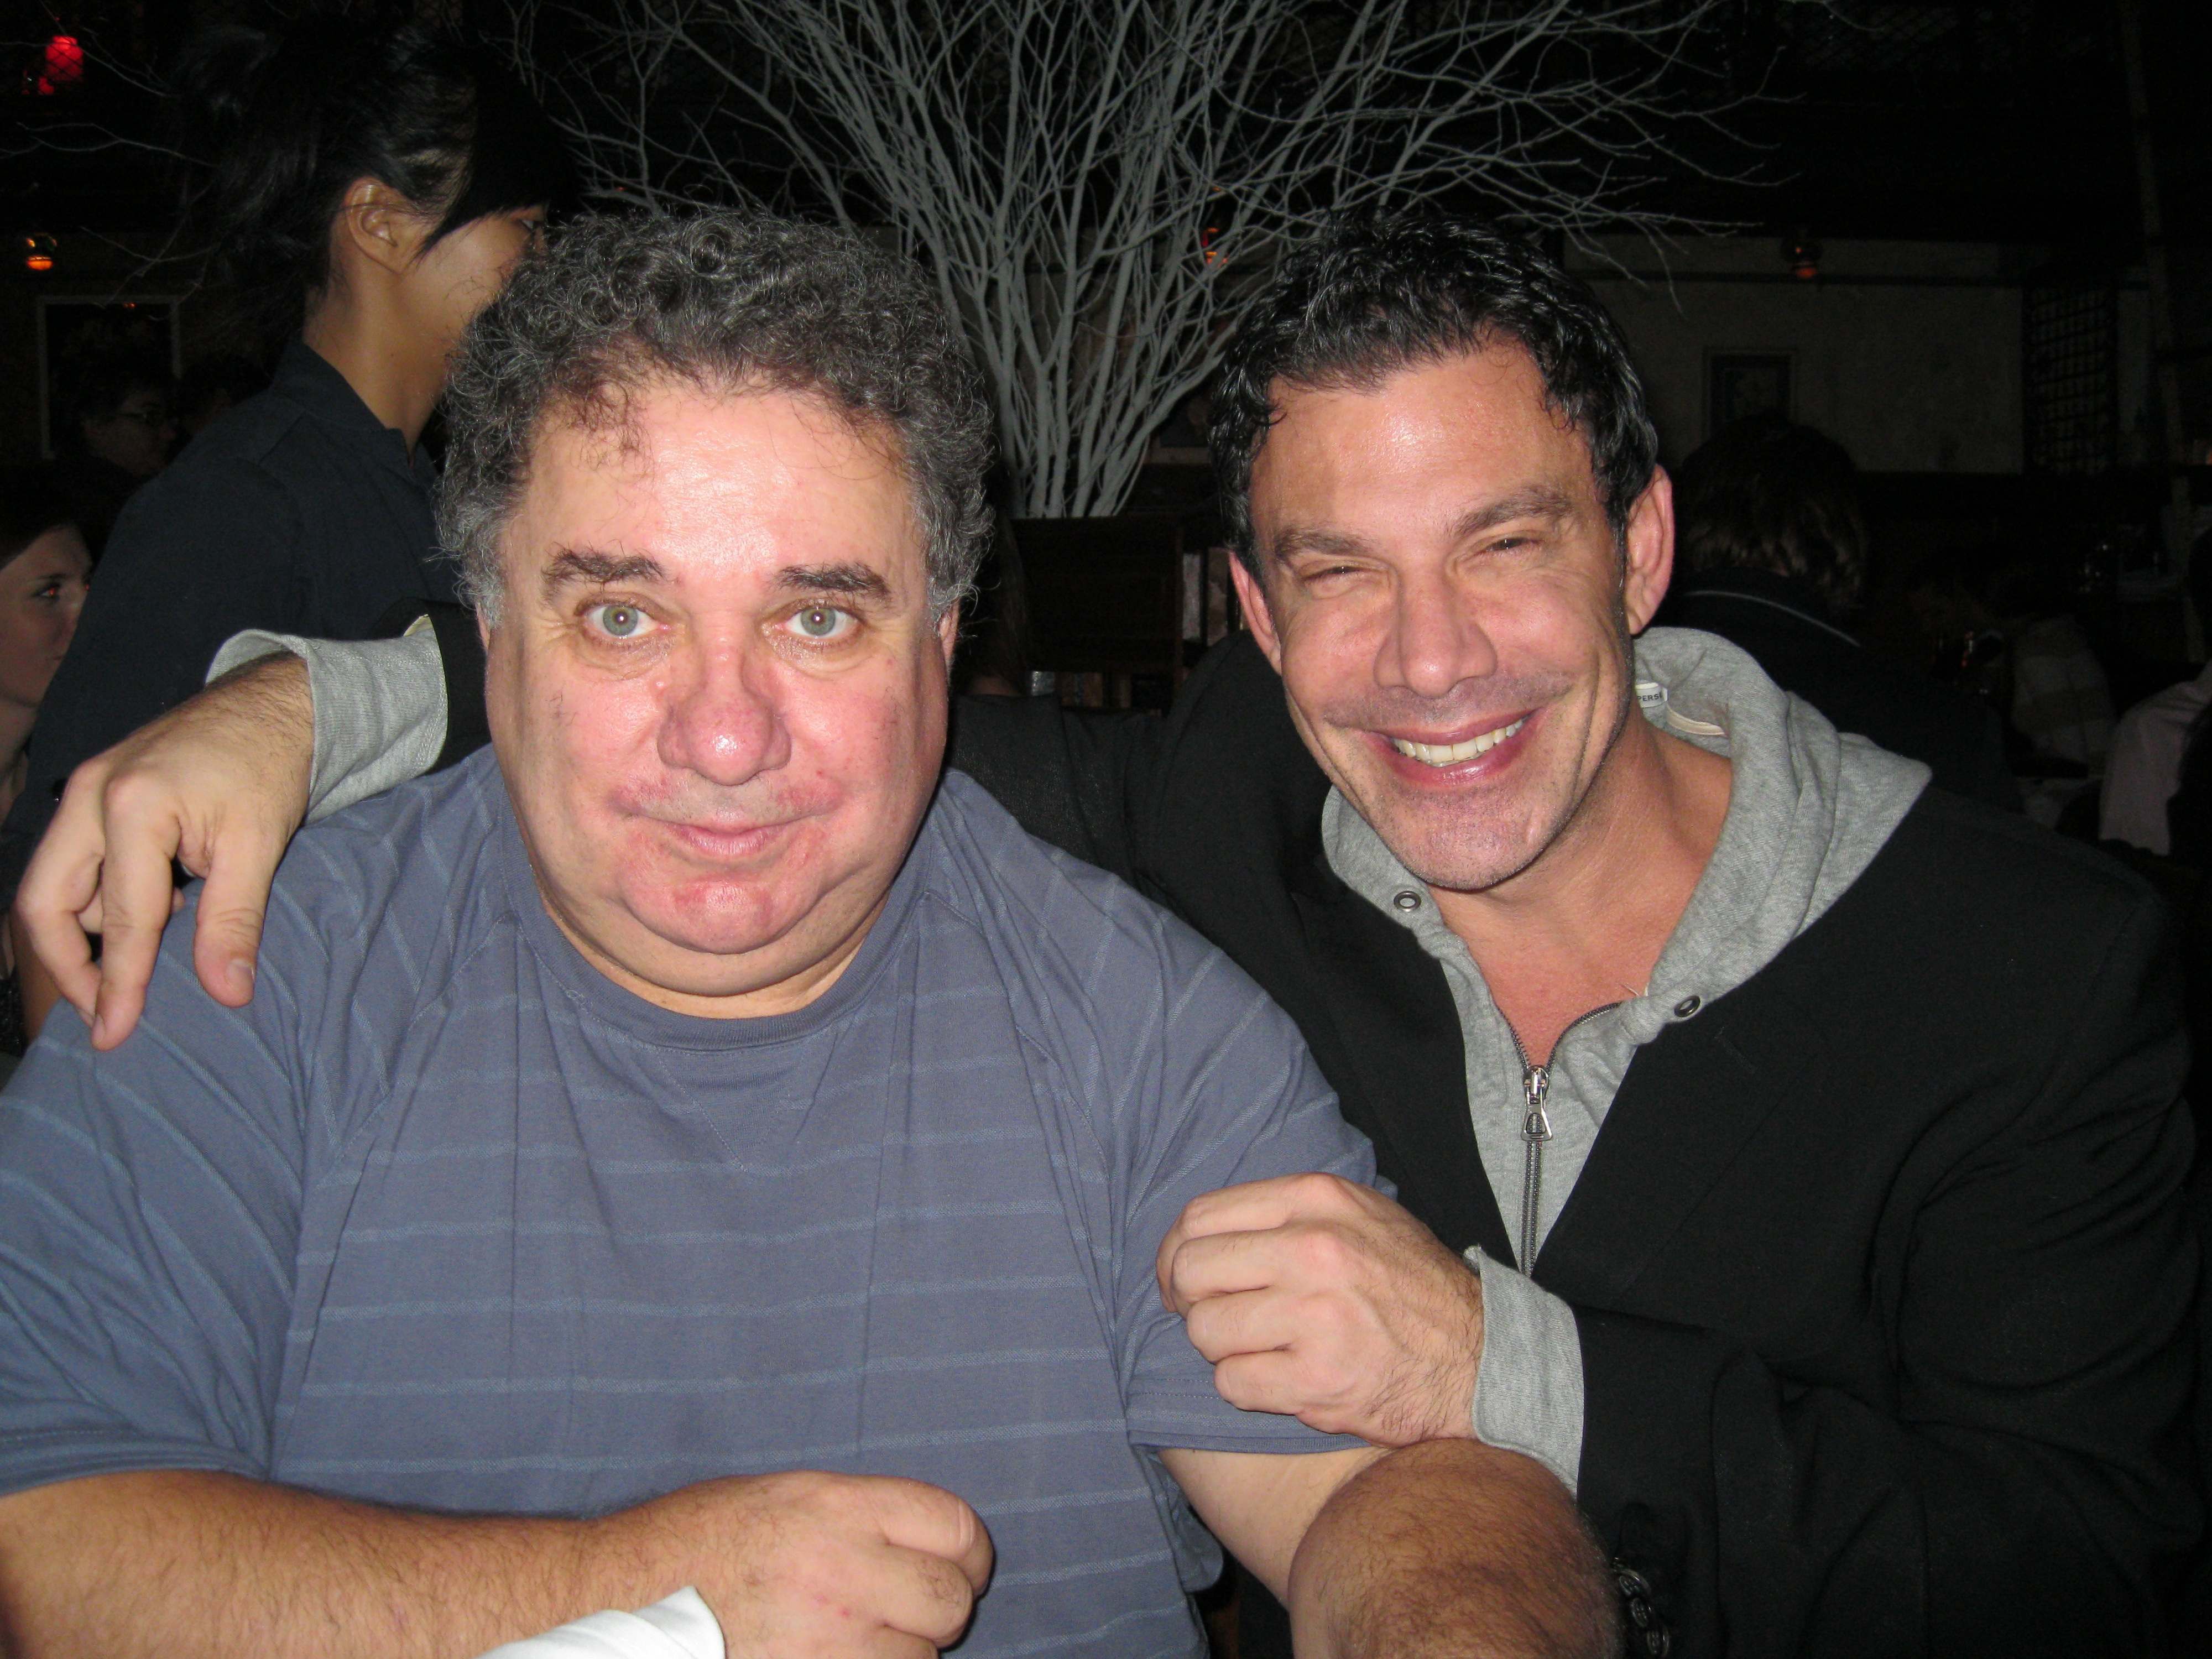 Me and Marc Sferrazza at wrap party for Deuces Wild